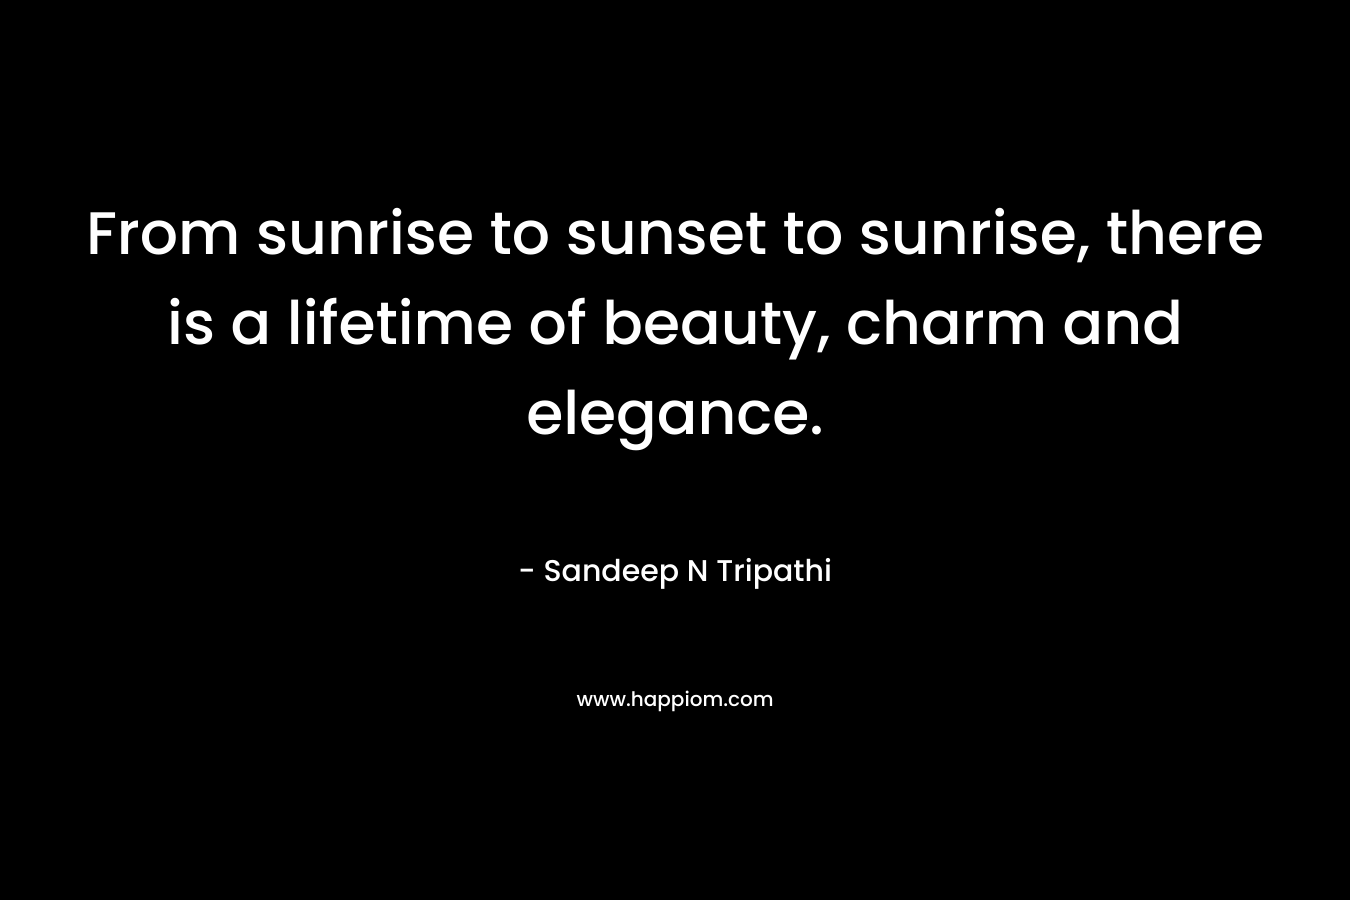 From sunrise to sunset to sunrise, there is a lifetime of beauty, charm and elegance.